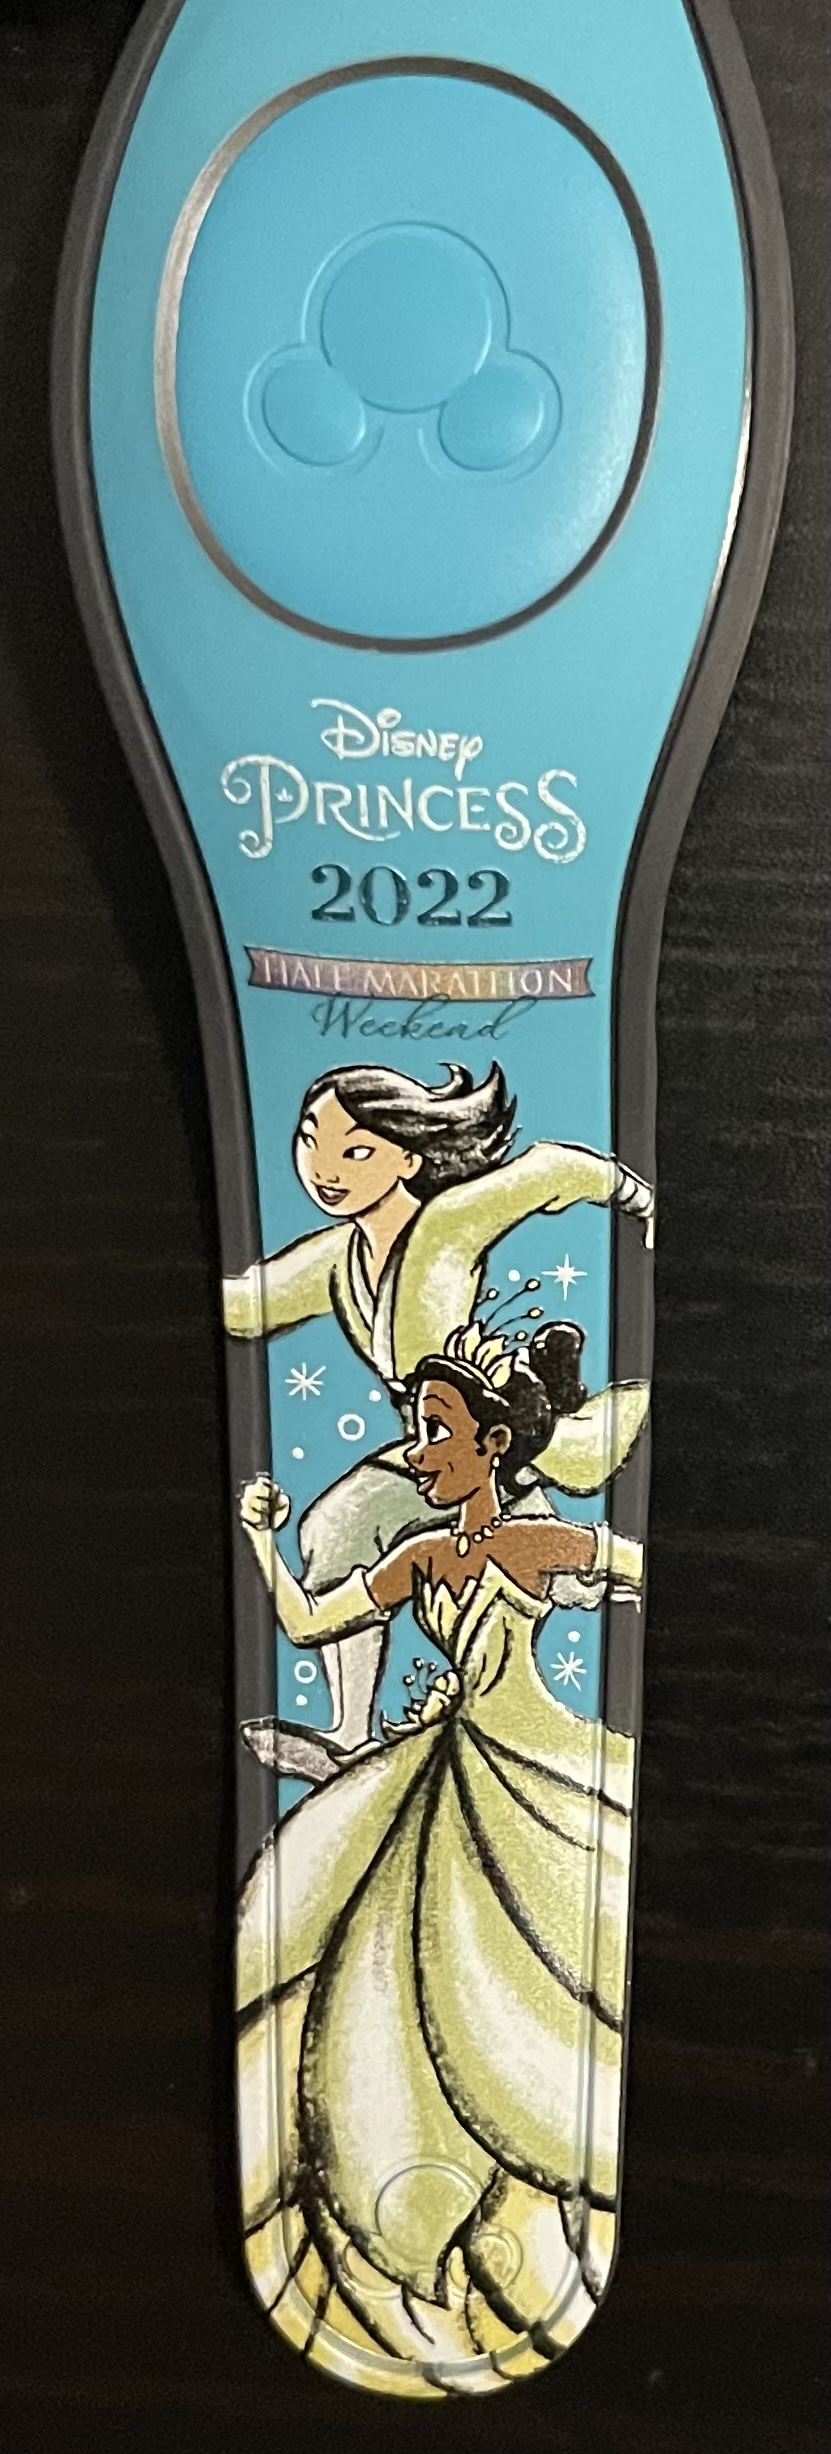 Check out this new Disney Princess Half Marathon Weekend 2022 Limited Edition 2000 MagicBand just released